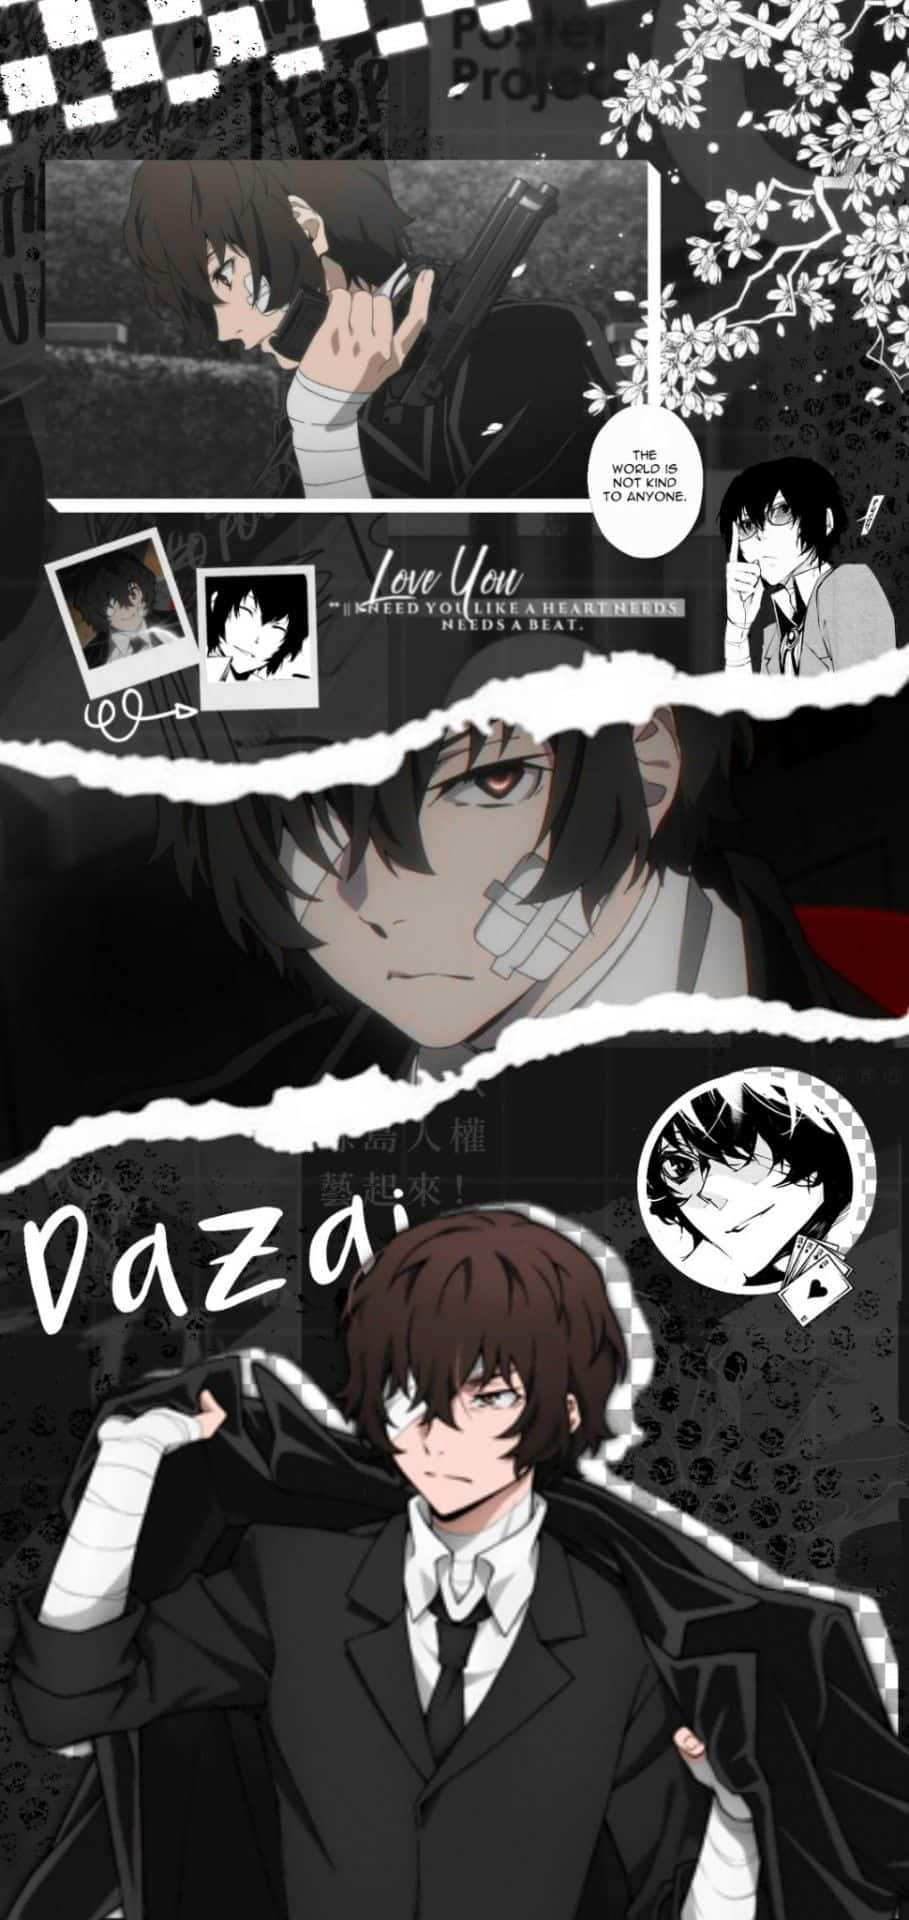 Abnormal Detective Agency from Bungo Stray Dogs